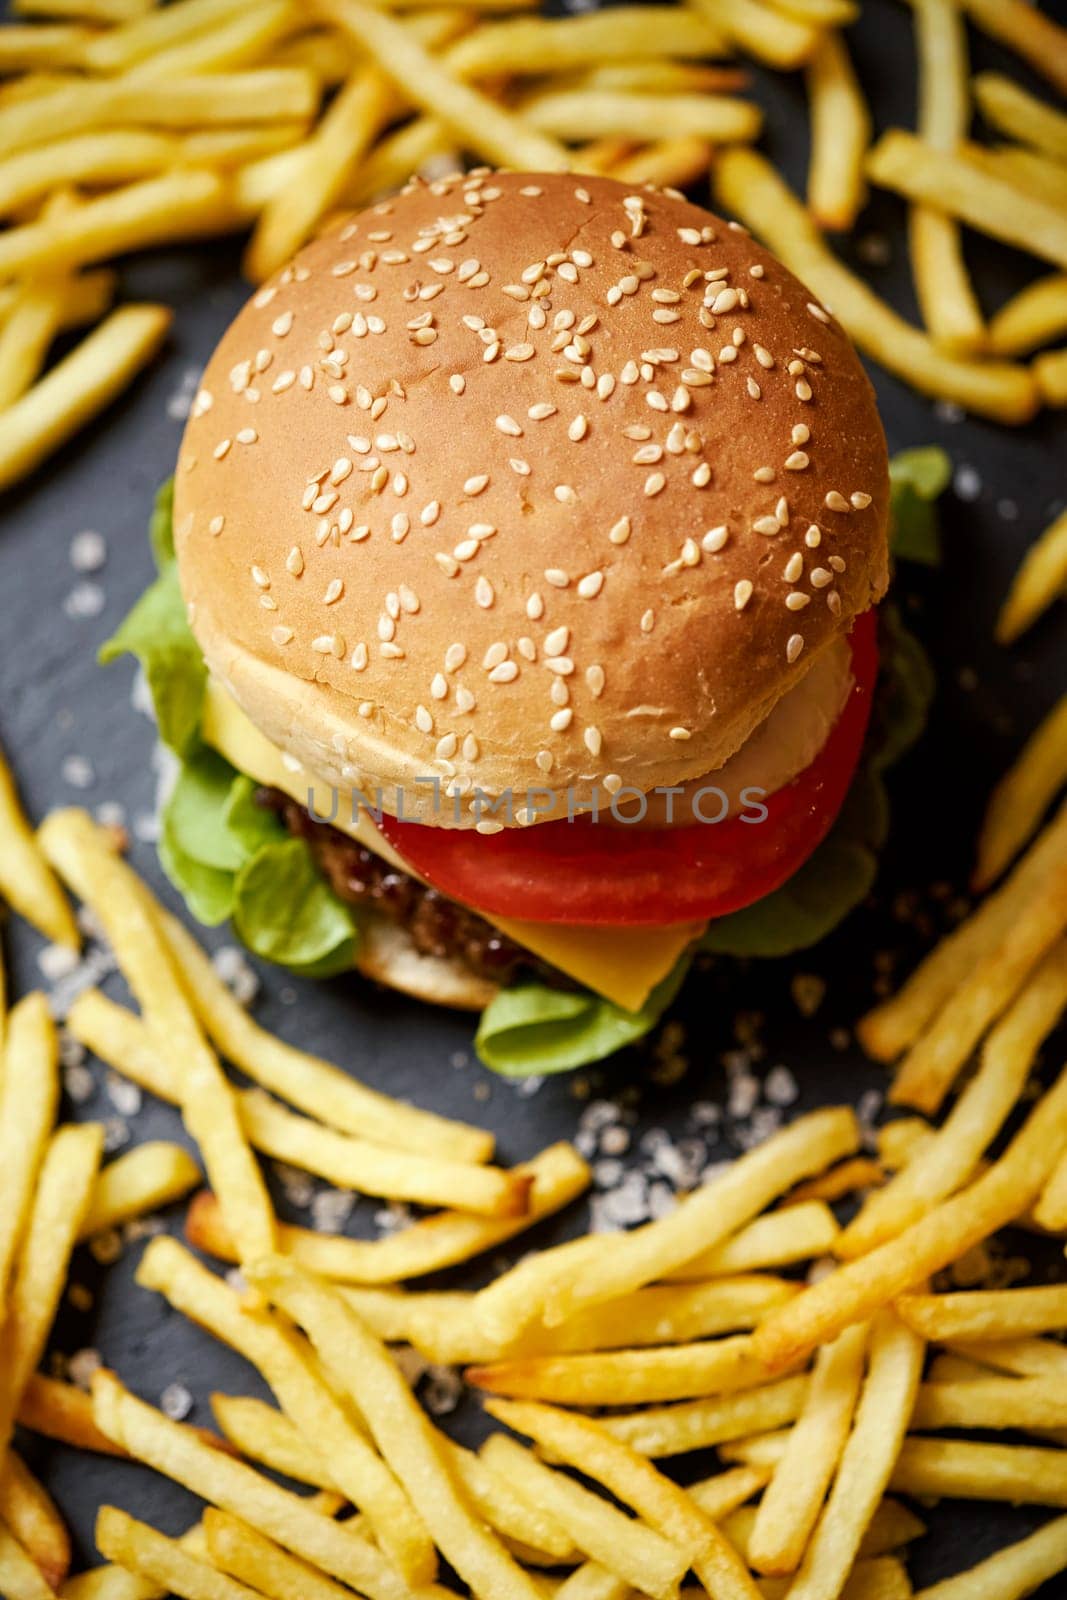 delicious cheeseburger surrounded by french fries on a black table